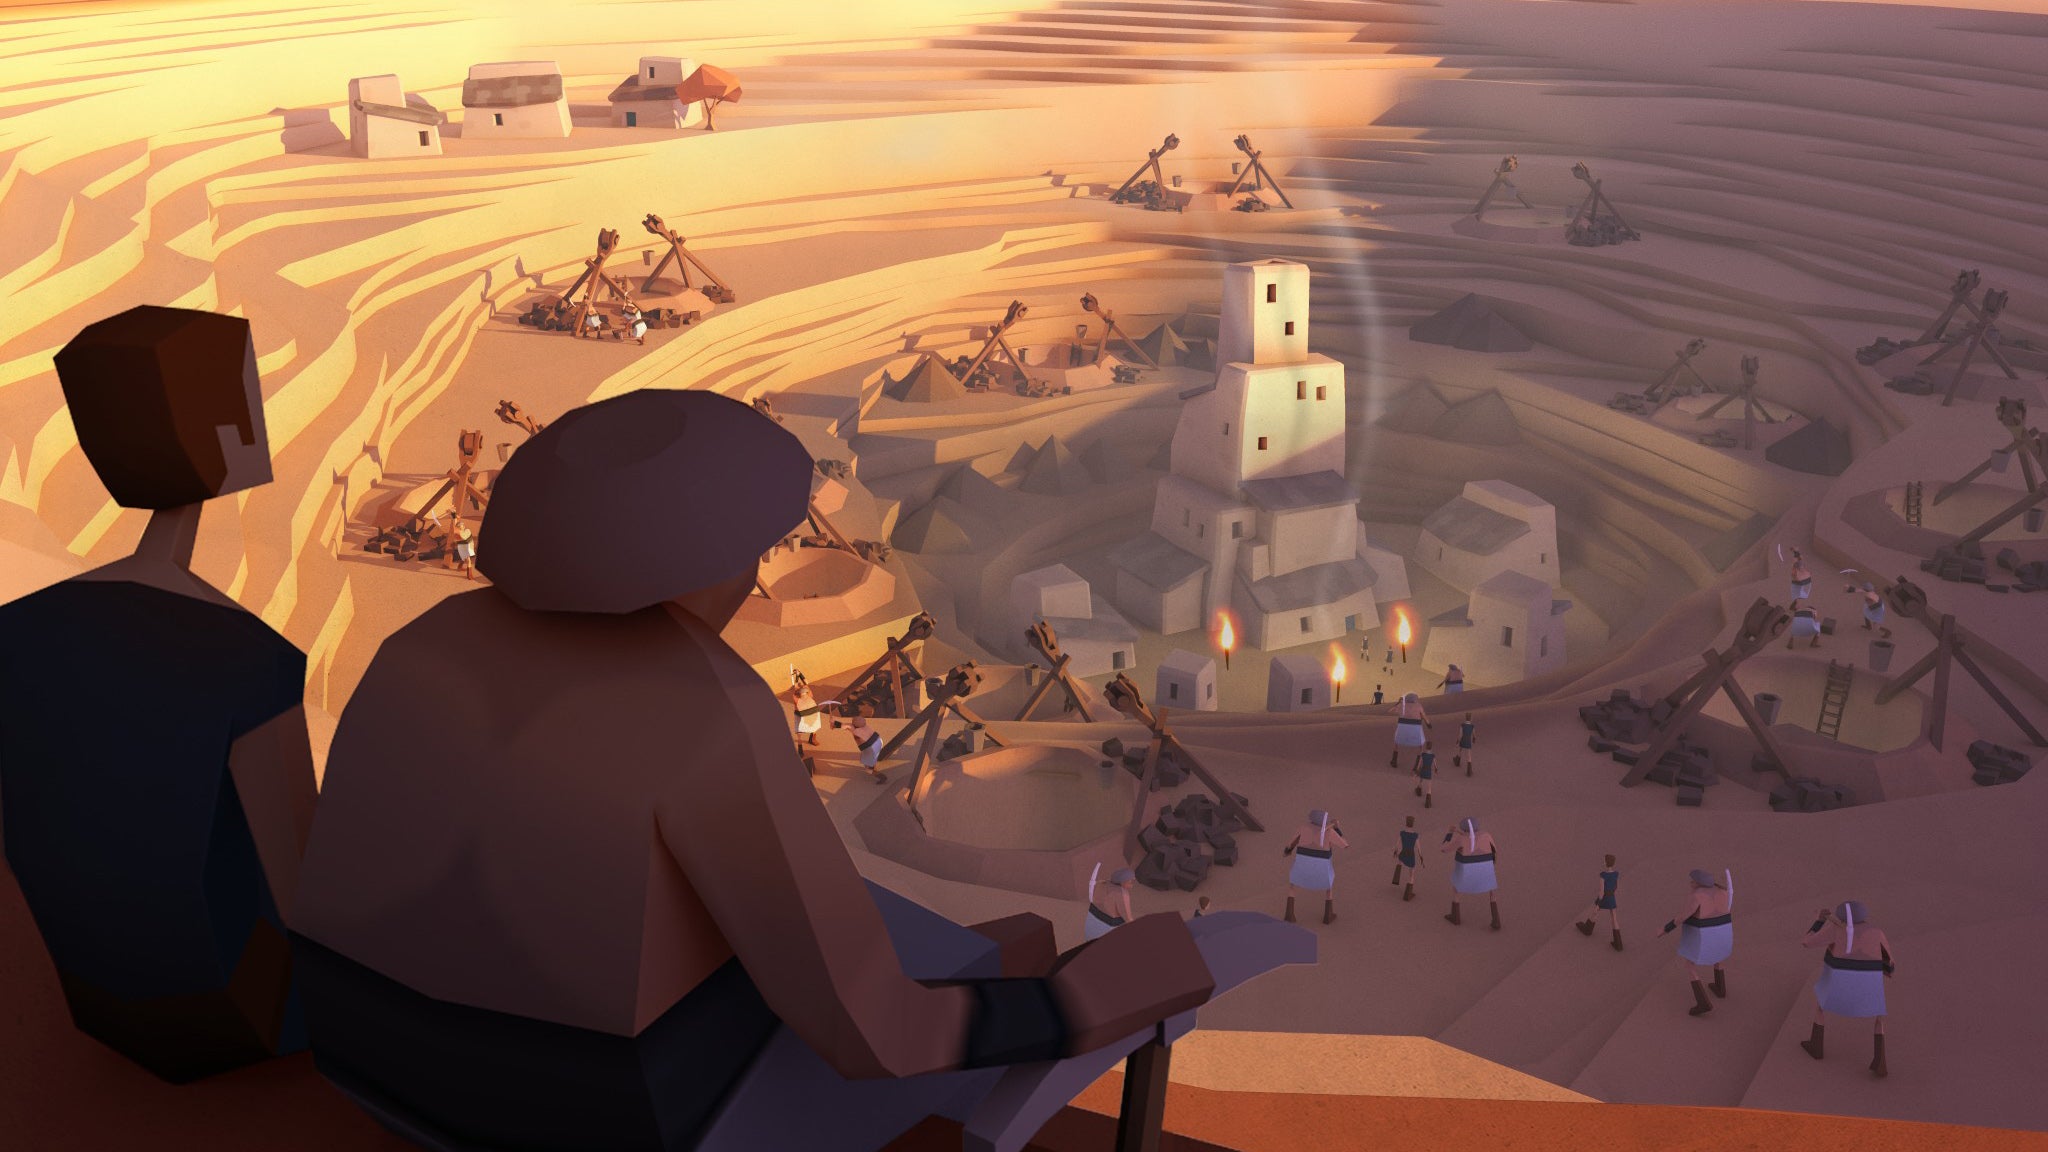 Image for 22 Cans' Godus co-creator leaves to work on Indie project